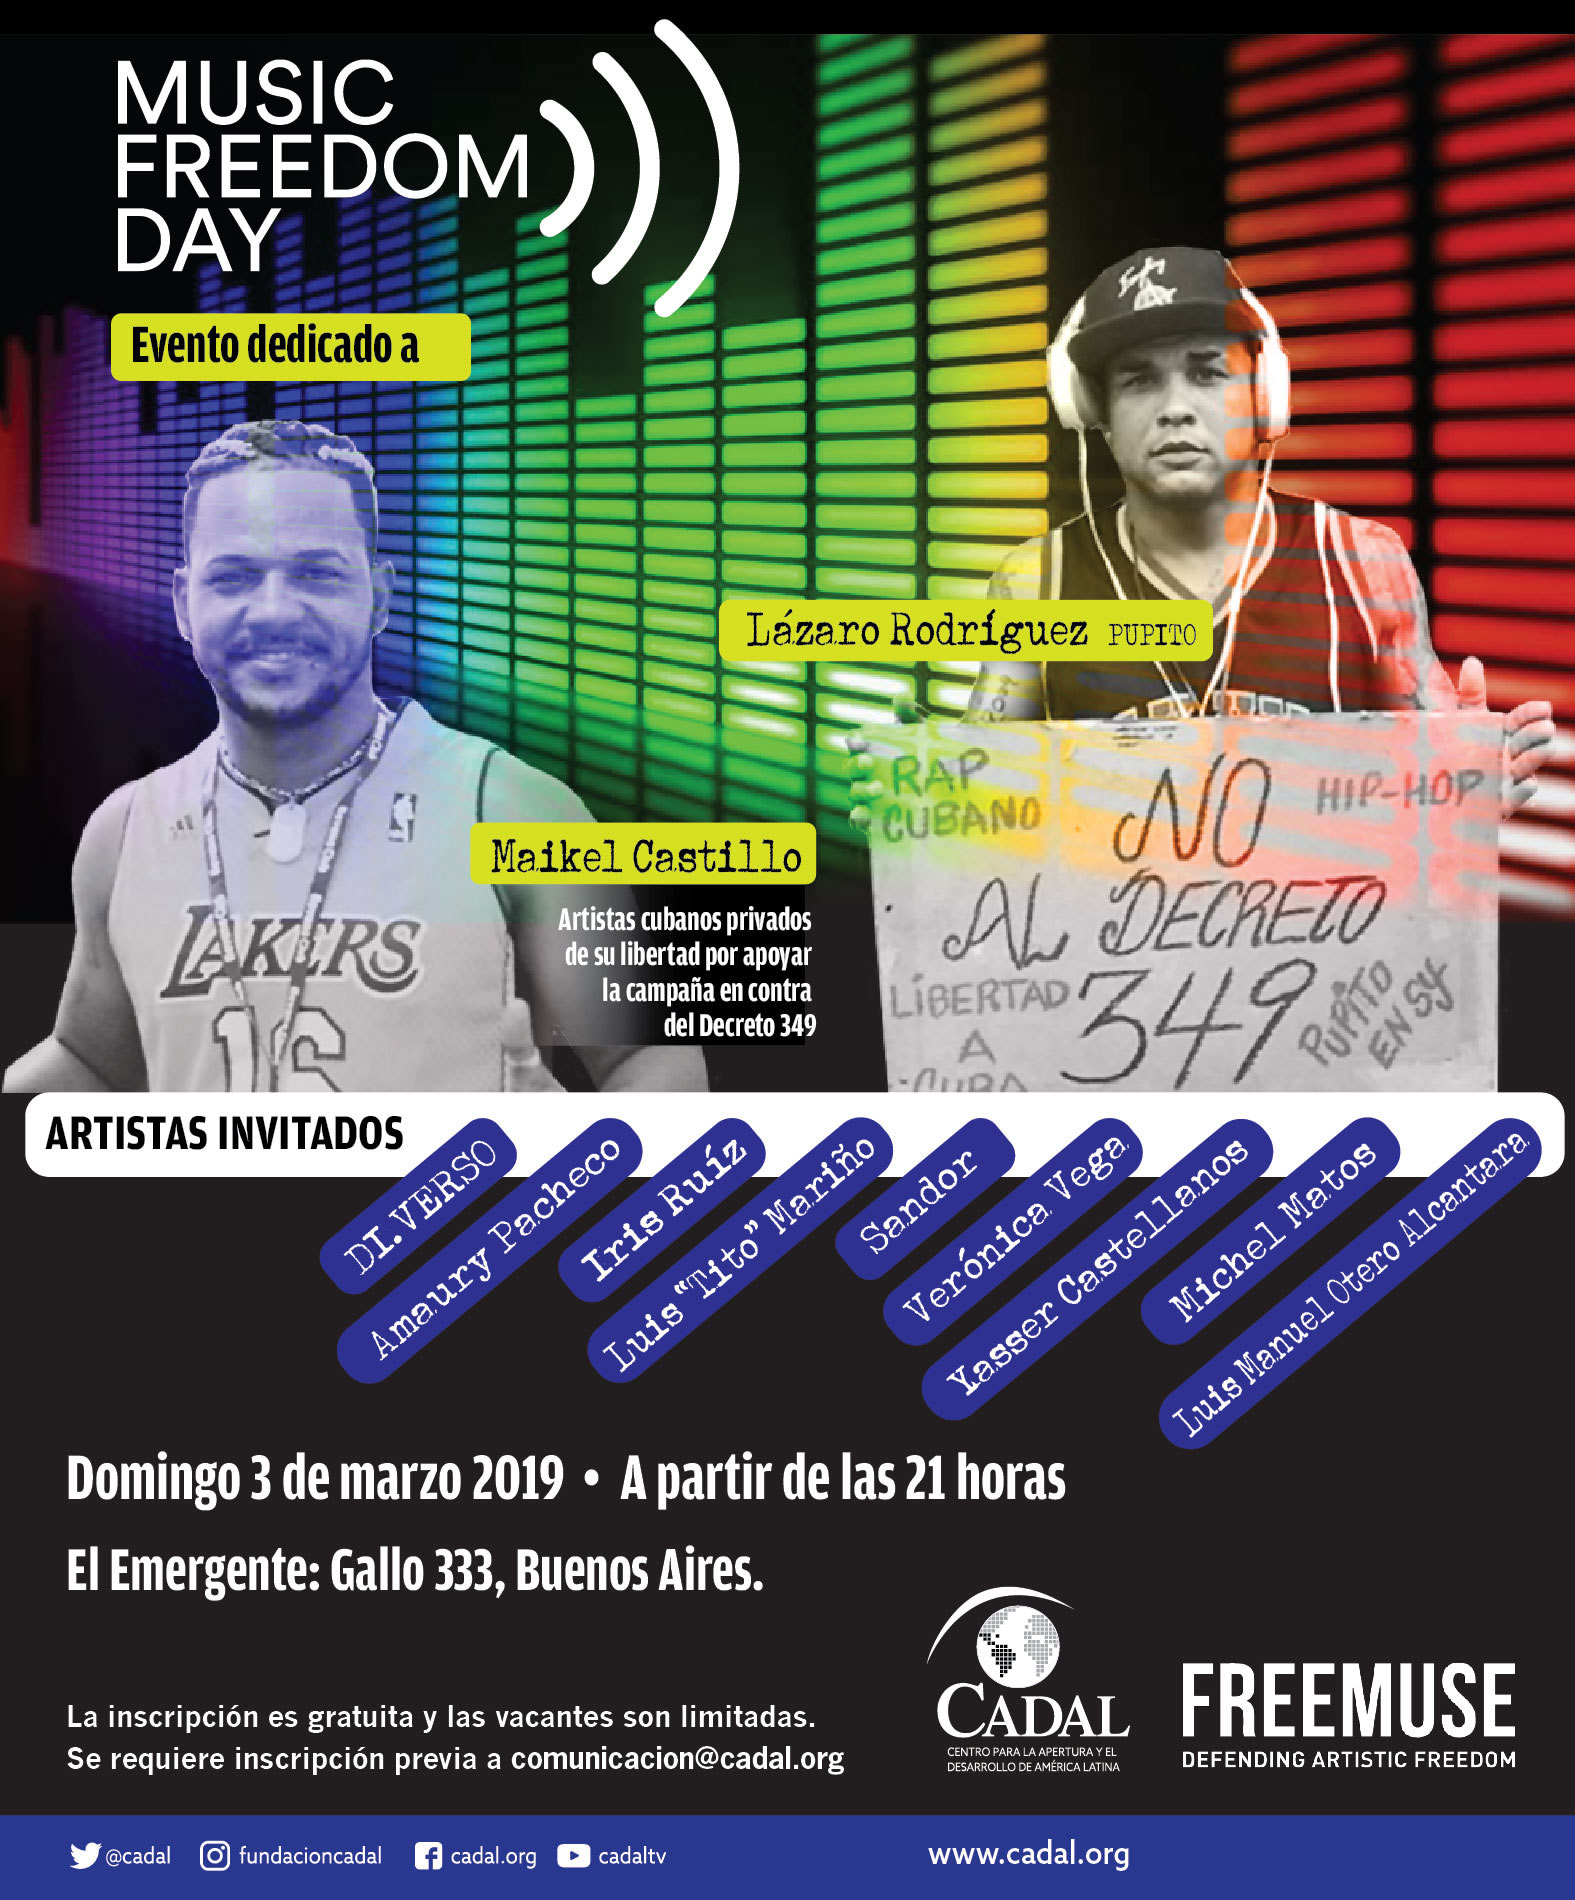 Music Freedom Day